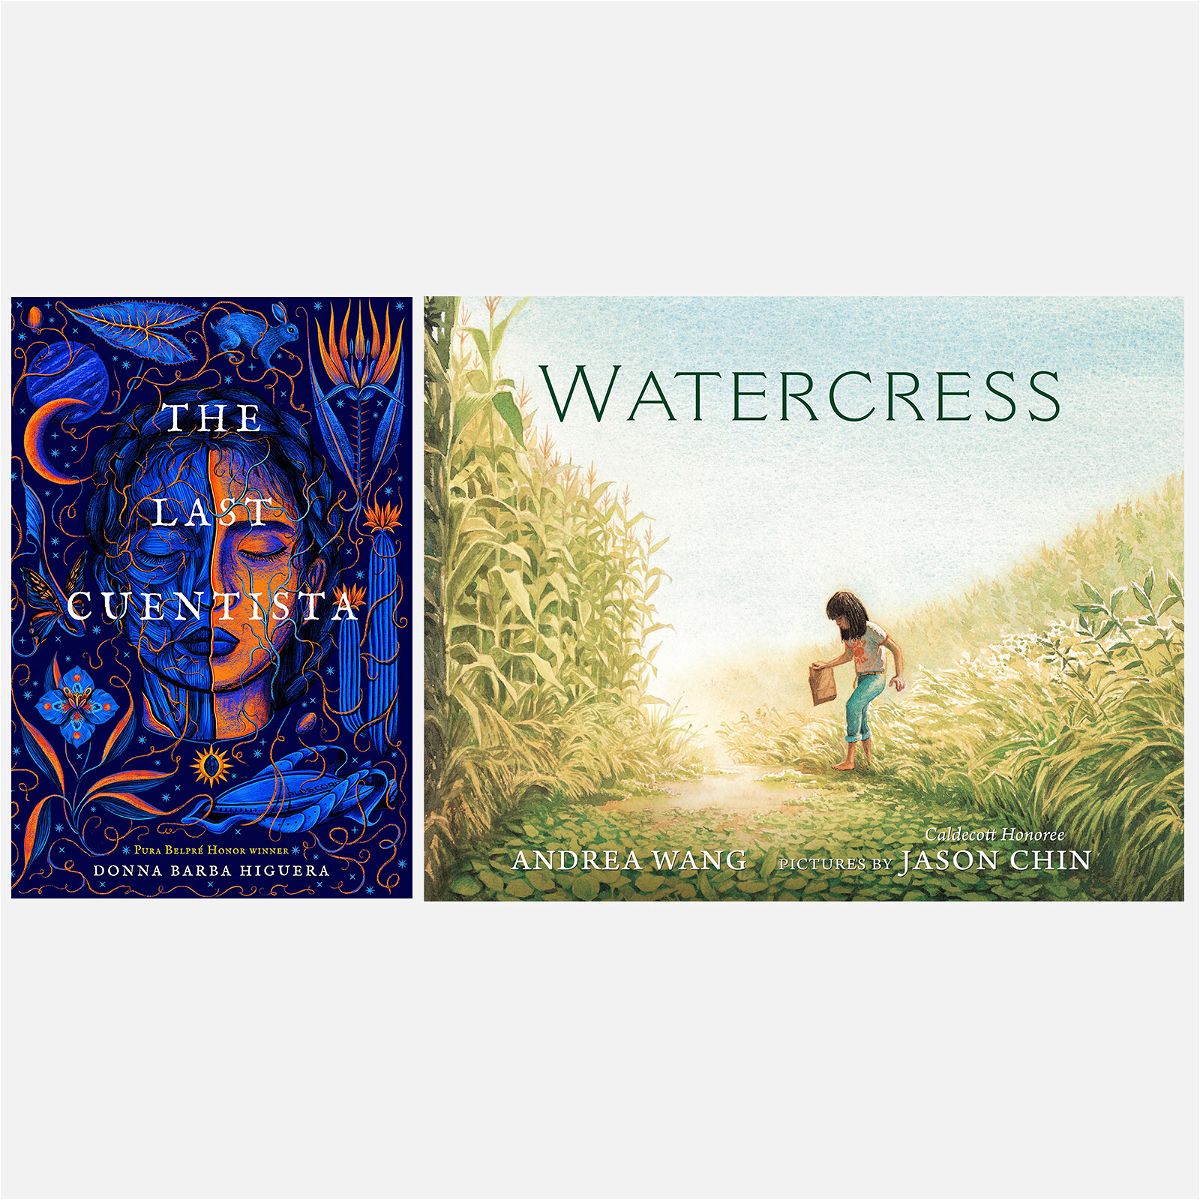 <i>From Penguin Random House/Amazon</i><br/>The American Library Association announced the winners of its Youth Media Awards